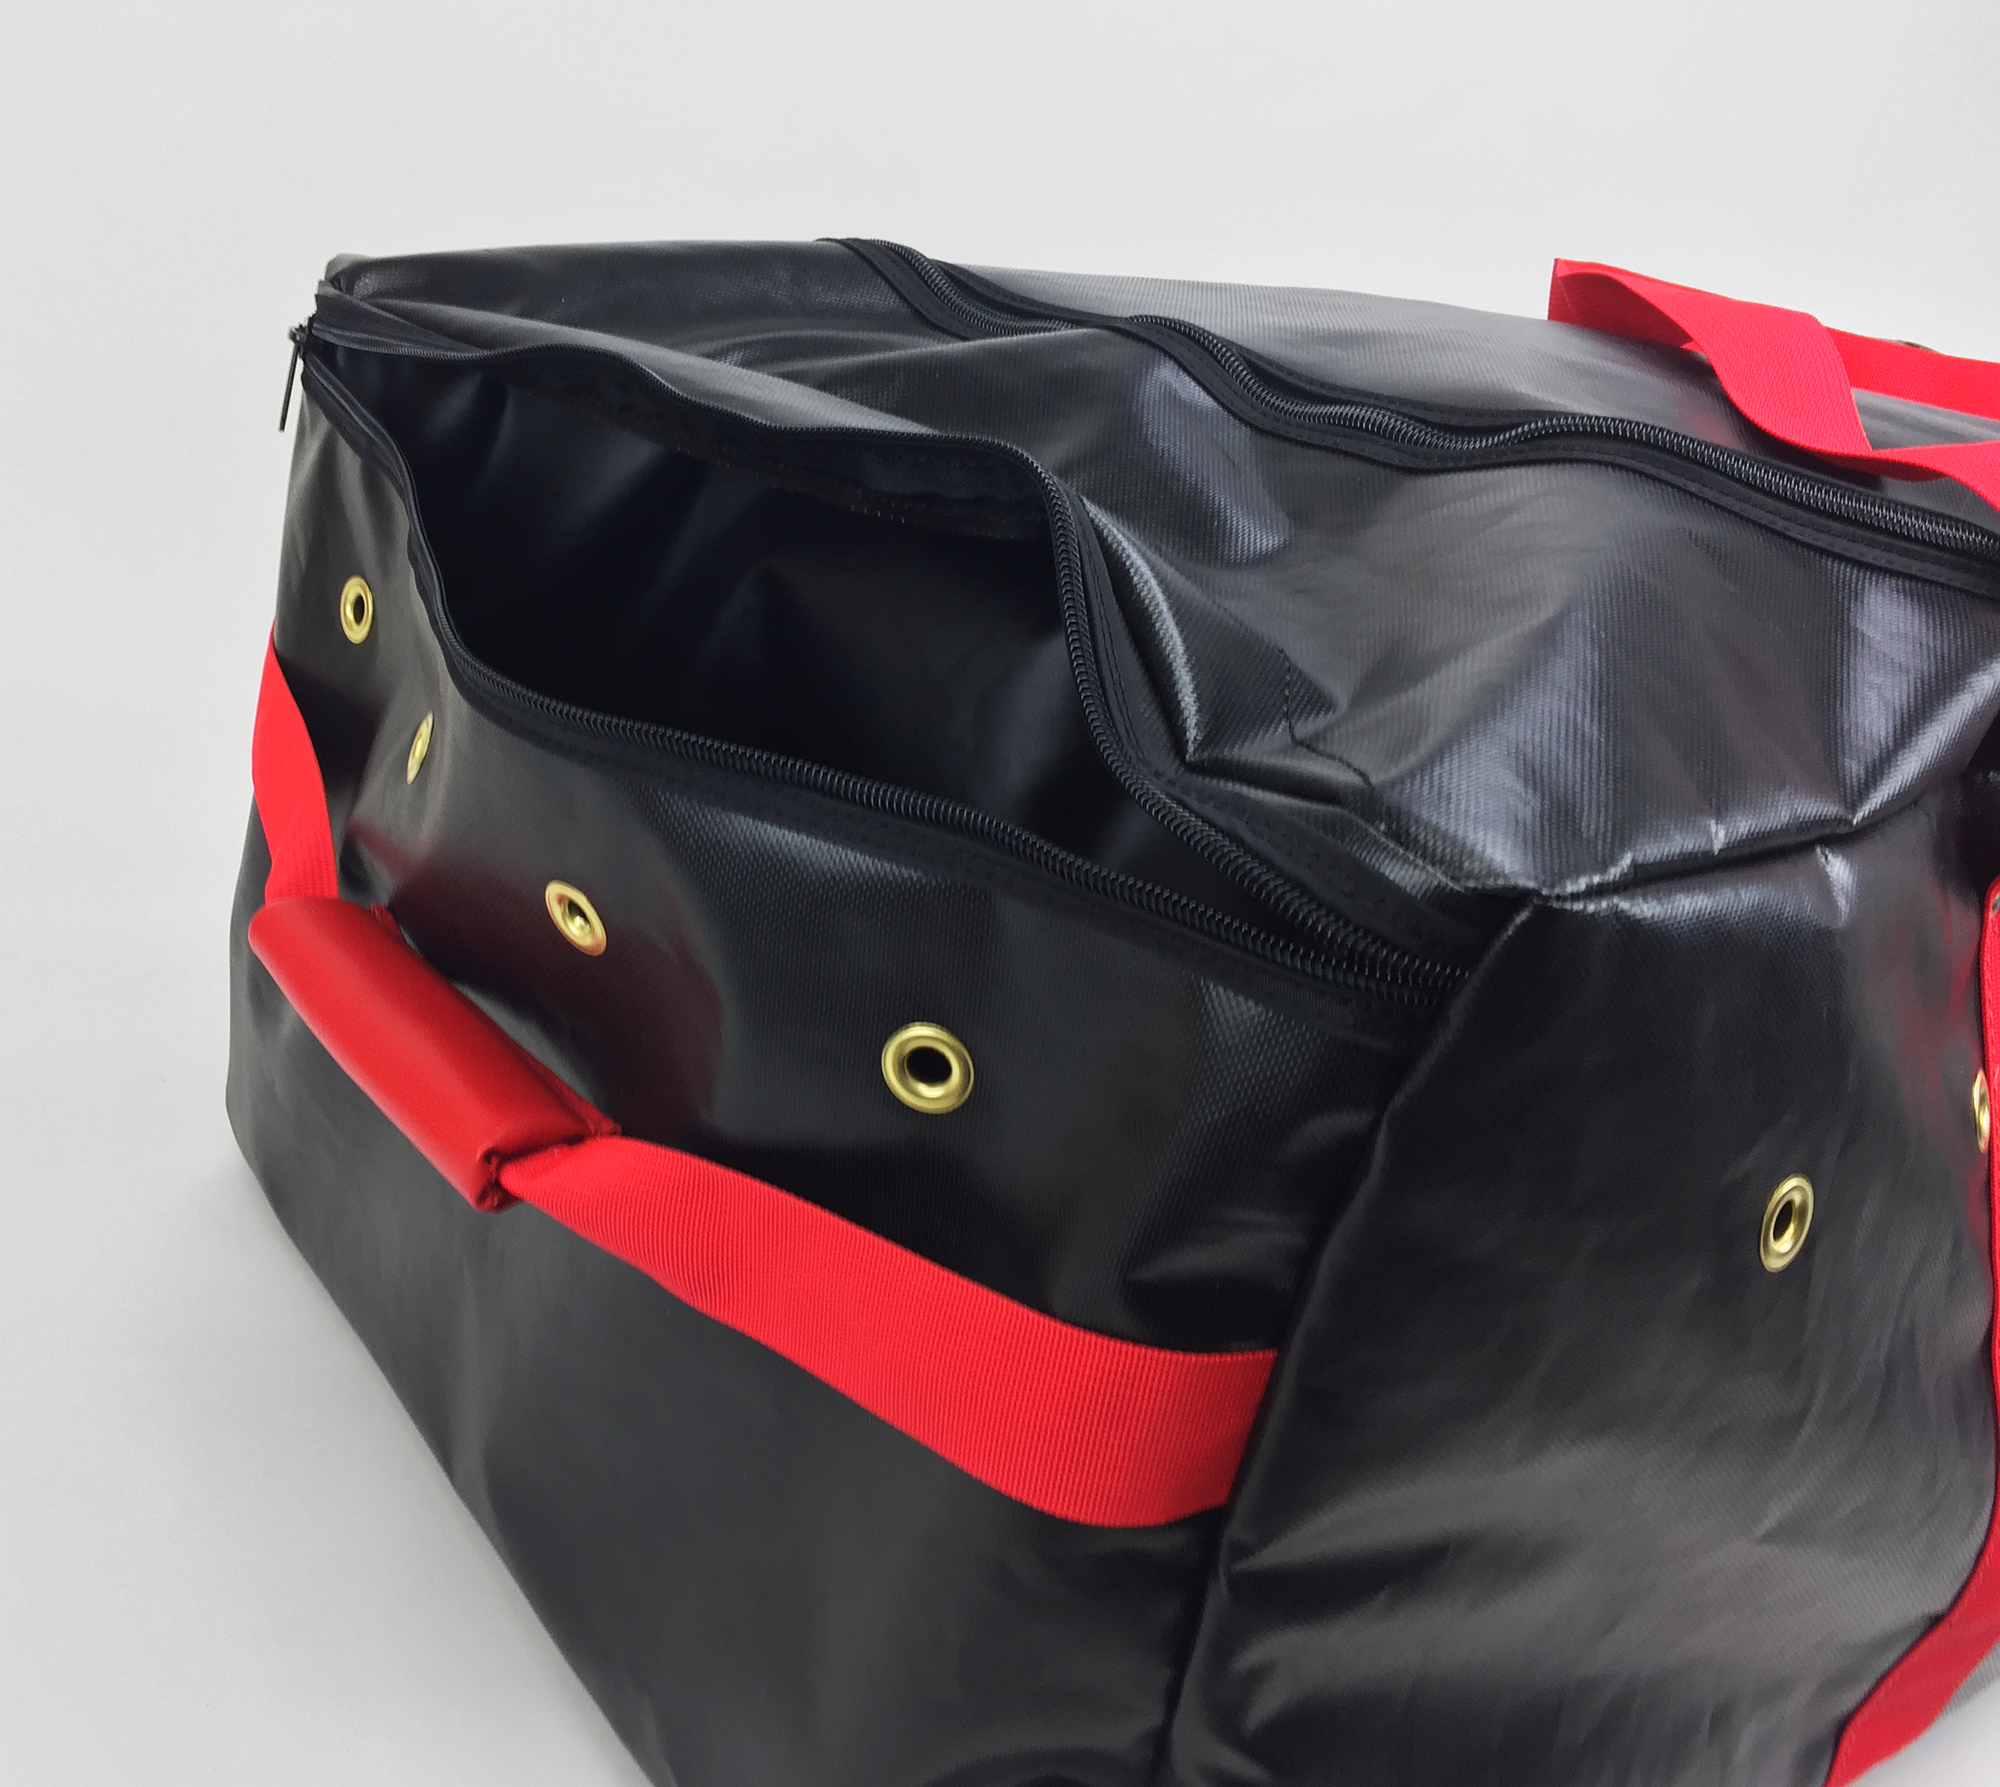 2500 bag with two zippered end compartments